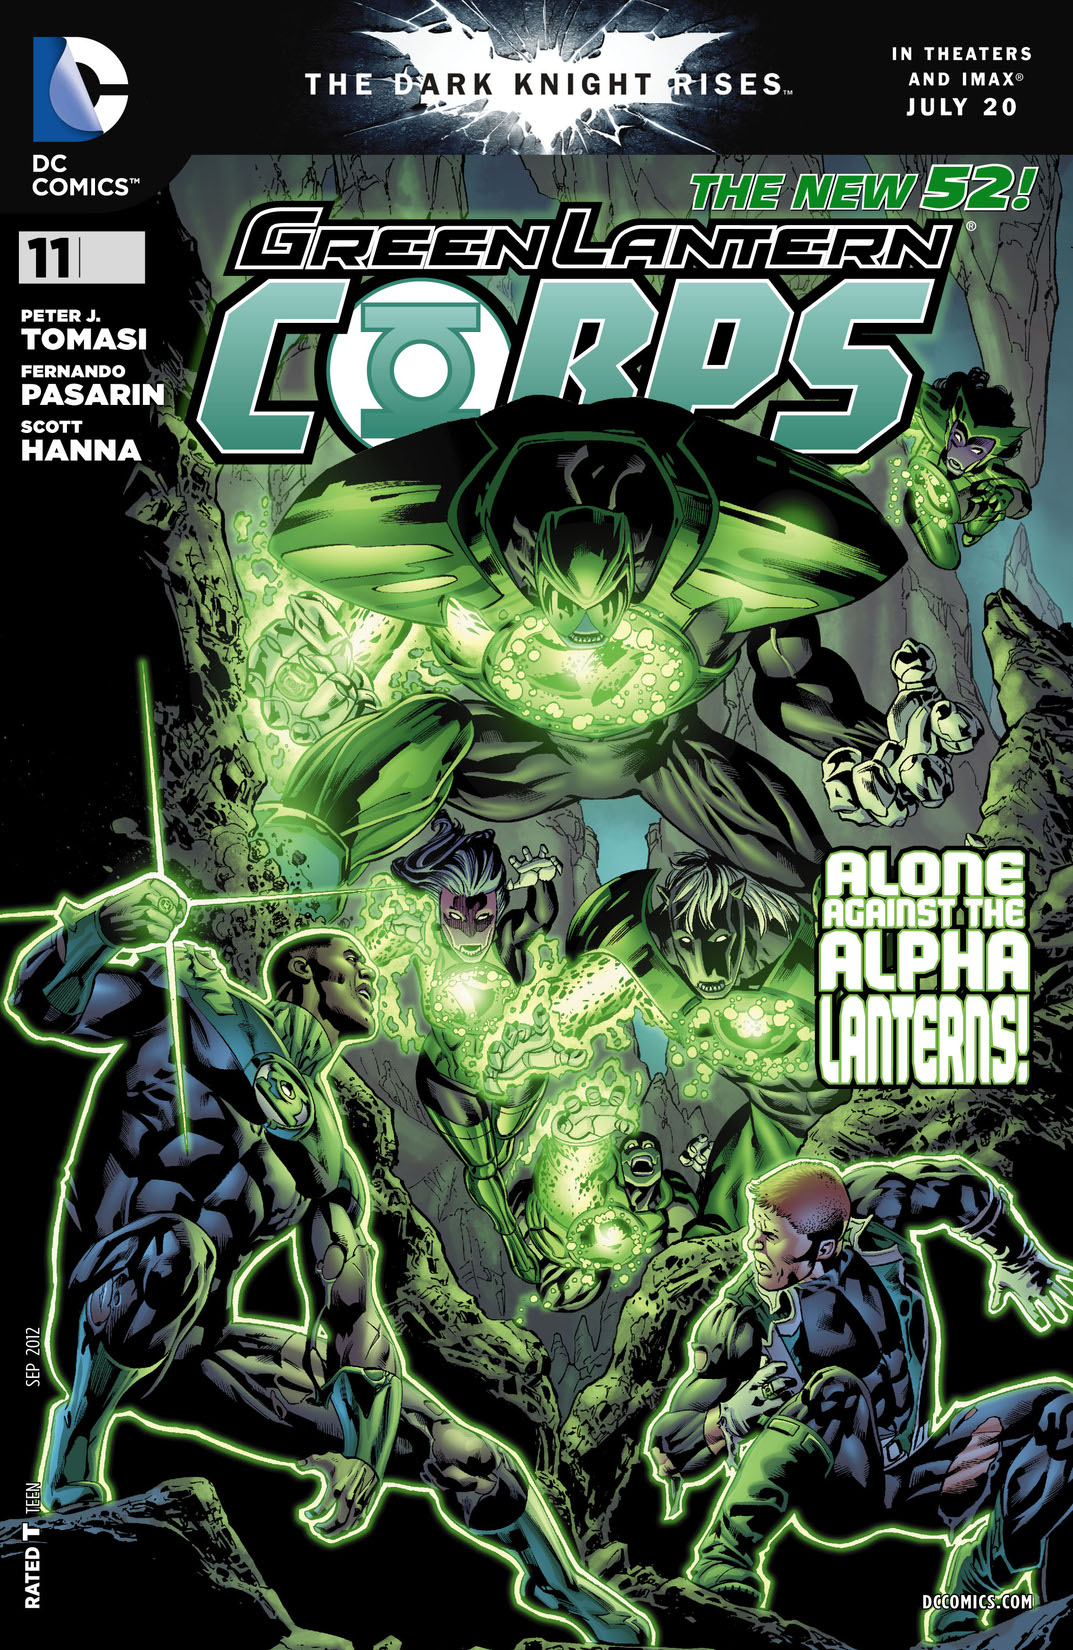 Green Lantern Corps (2011-) #11 preview images